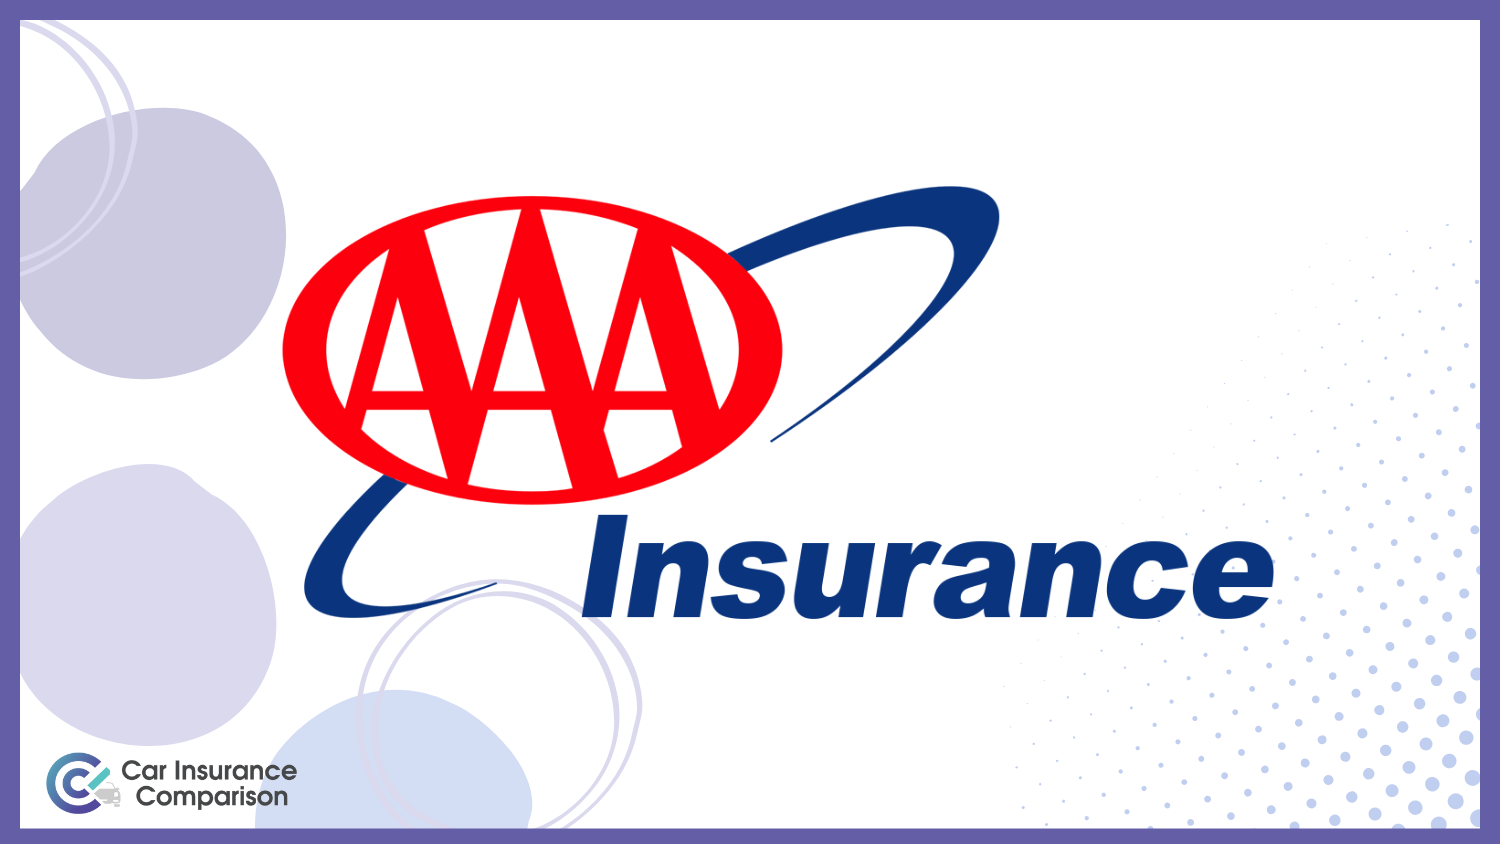 AAA: Best Temporary Car Insurance for Drivers Under 21